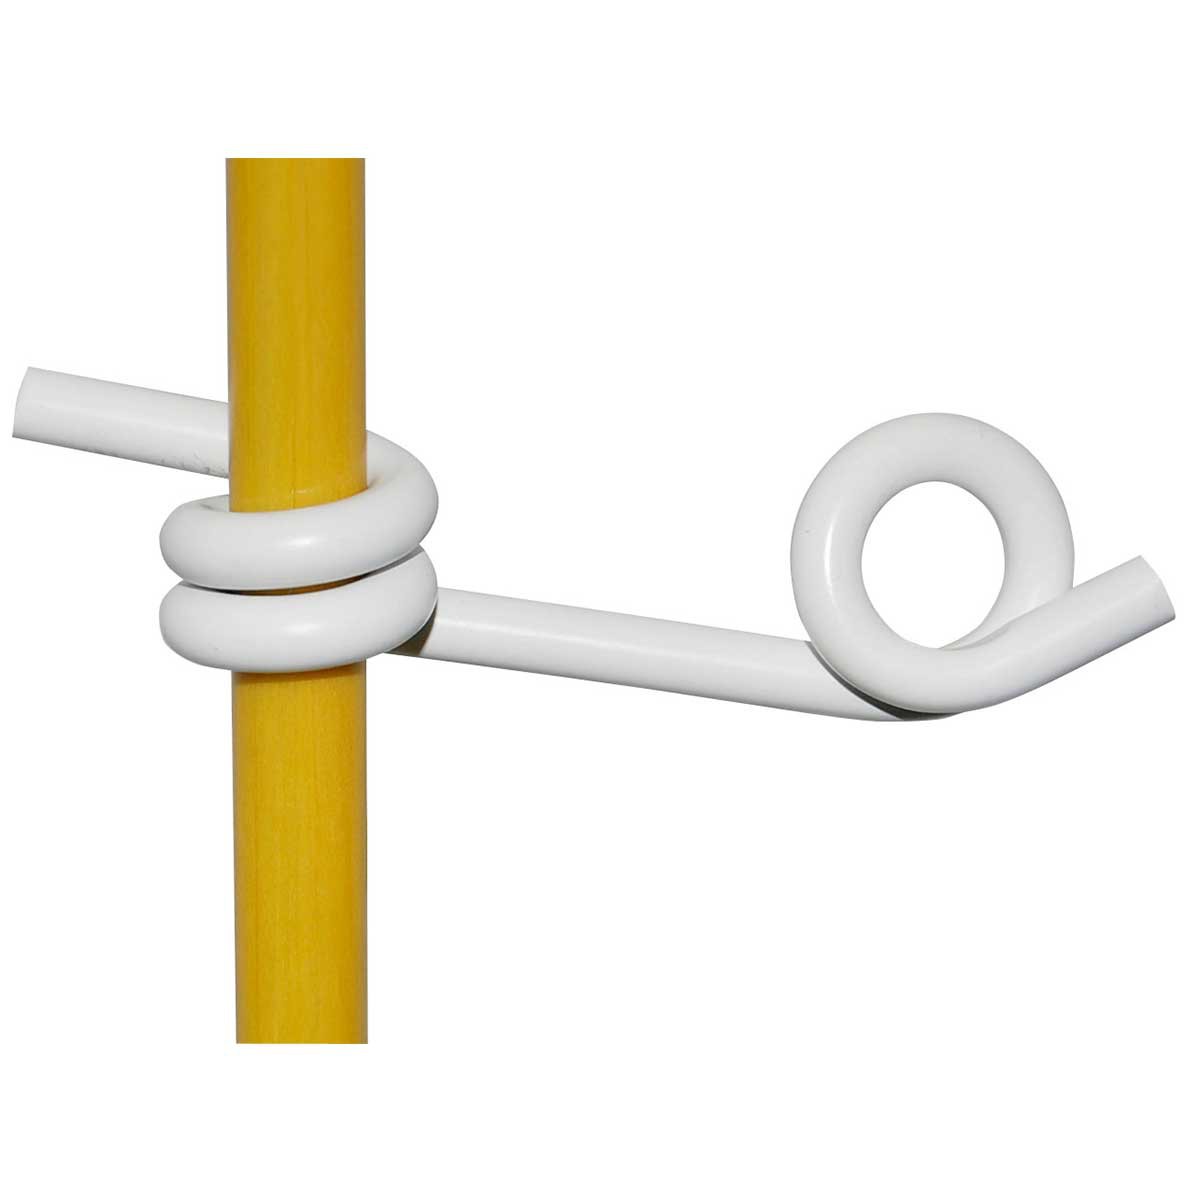 Plastic eyelets for round fibreglass posts up to 10 mm